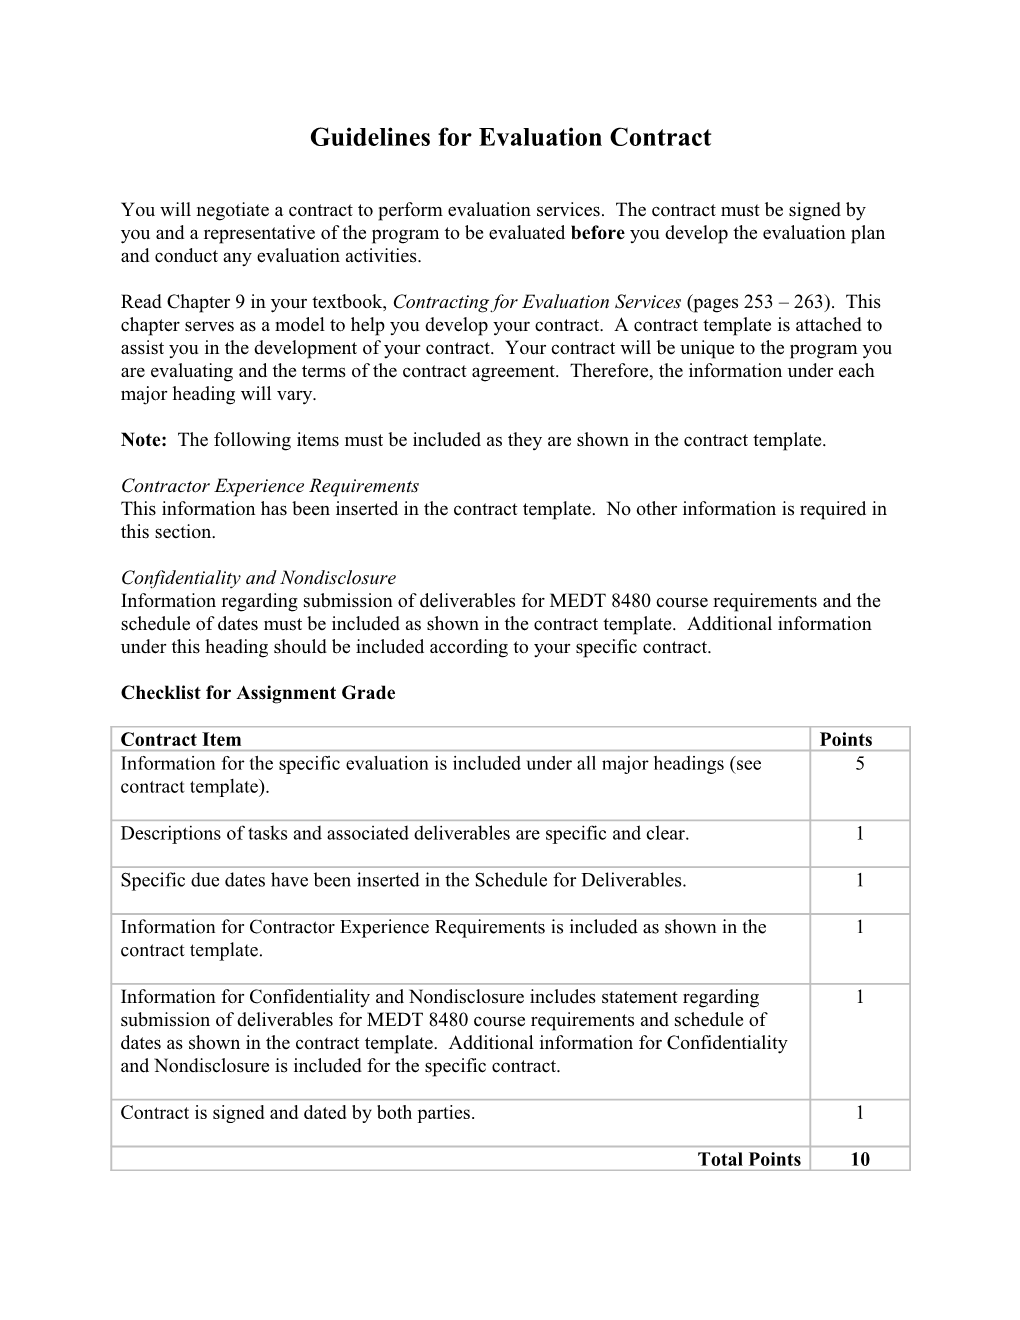 Guidelines for Evaluation Contract